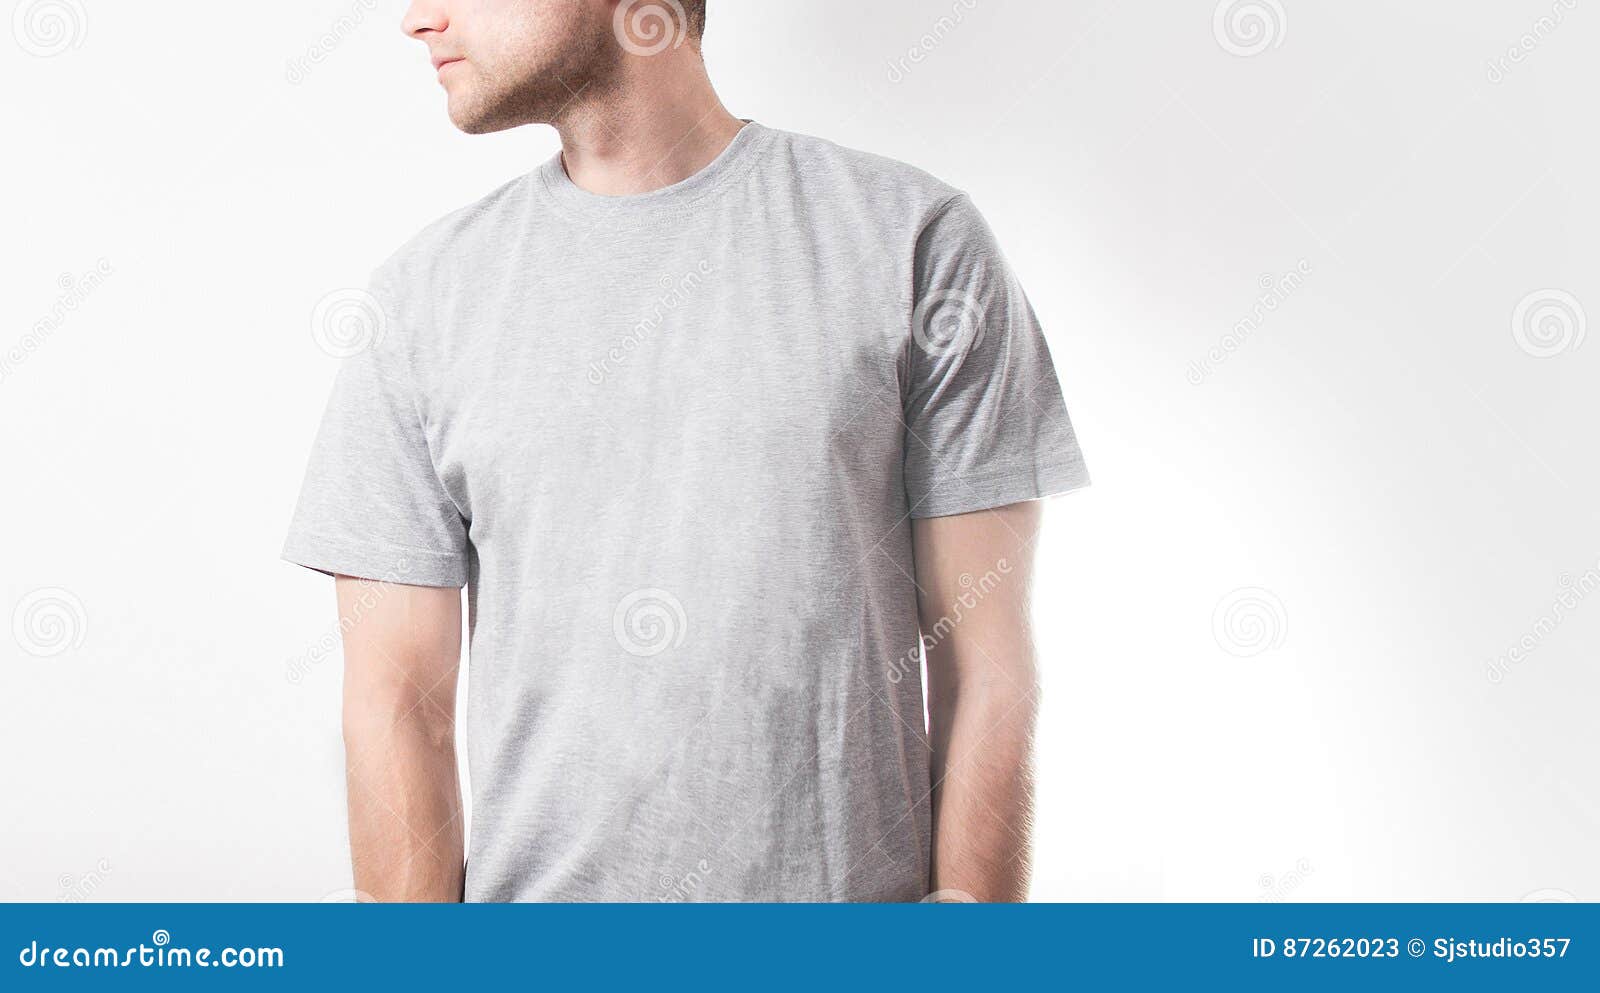 The Guy in the Blank Grey T-shirt, Stand, Smiling on a White Background ...